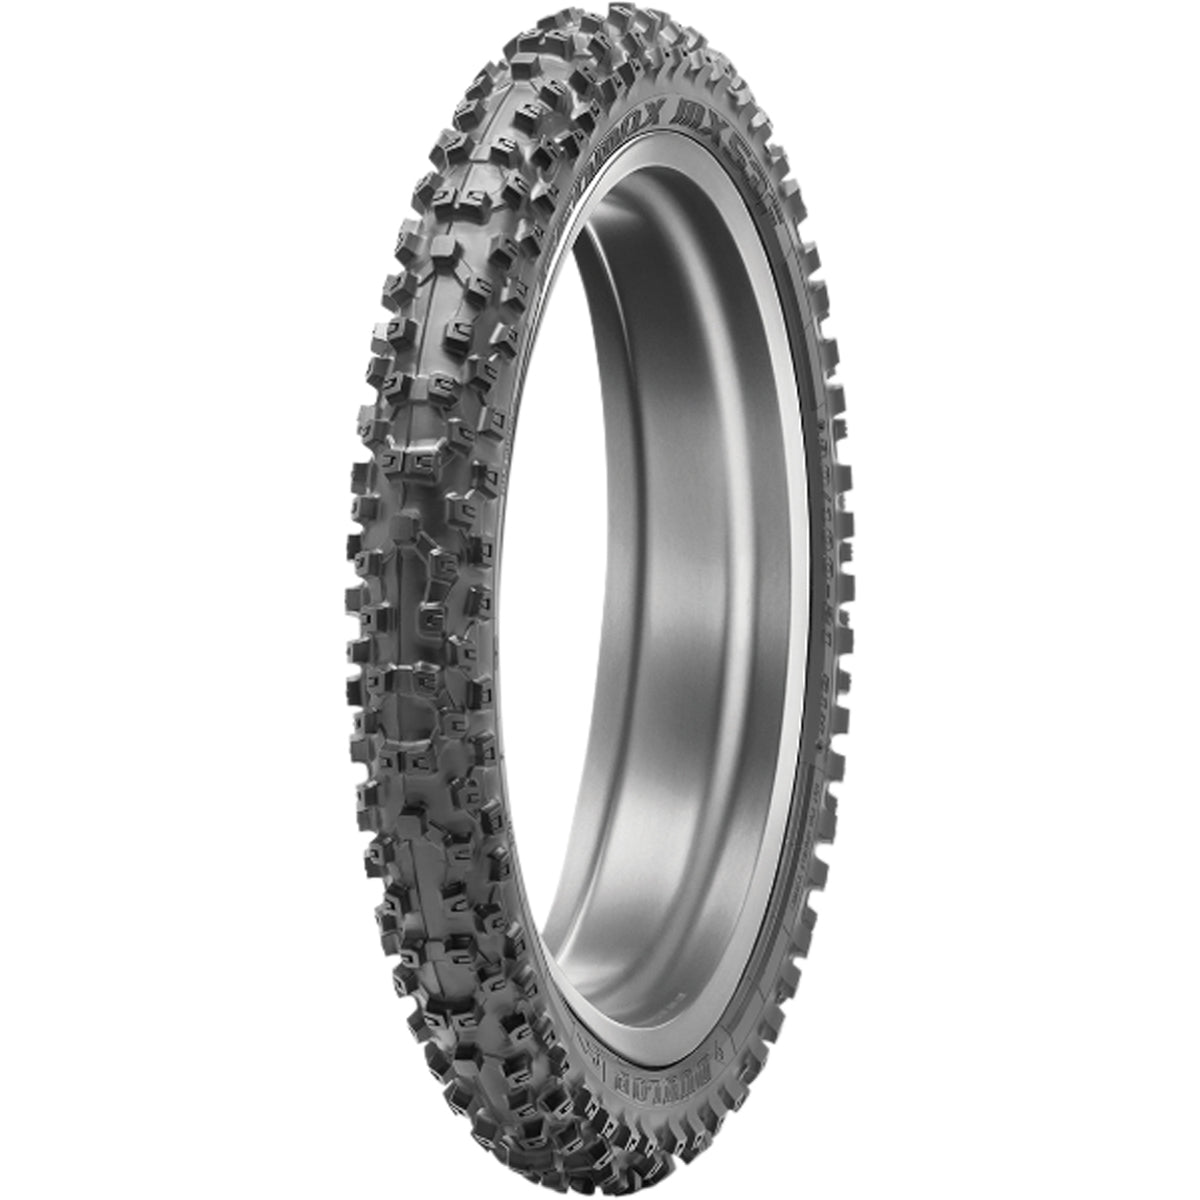 Dunlop Geomax MX53 12" Front Off-Road Tires-0312